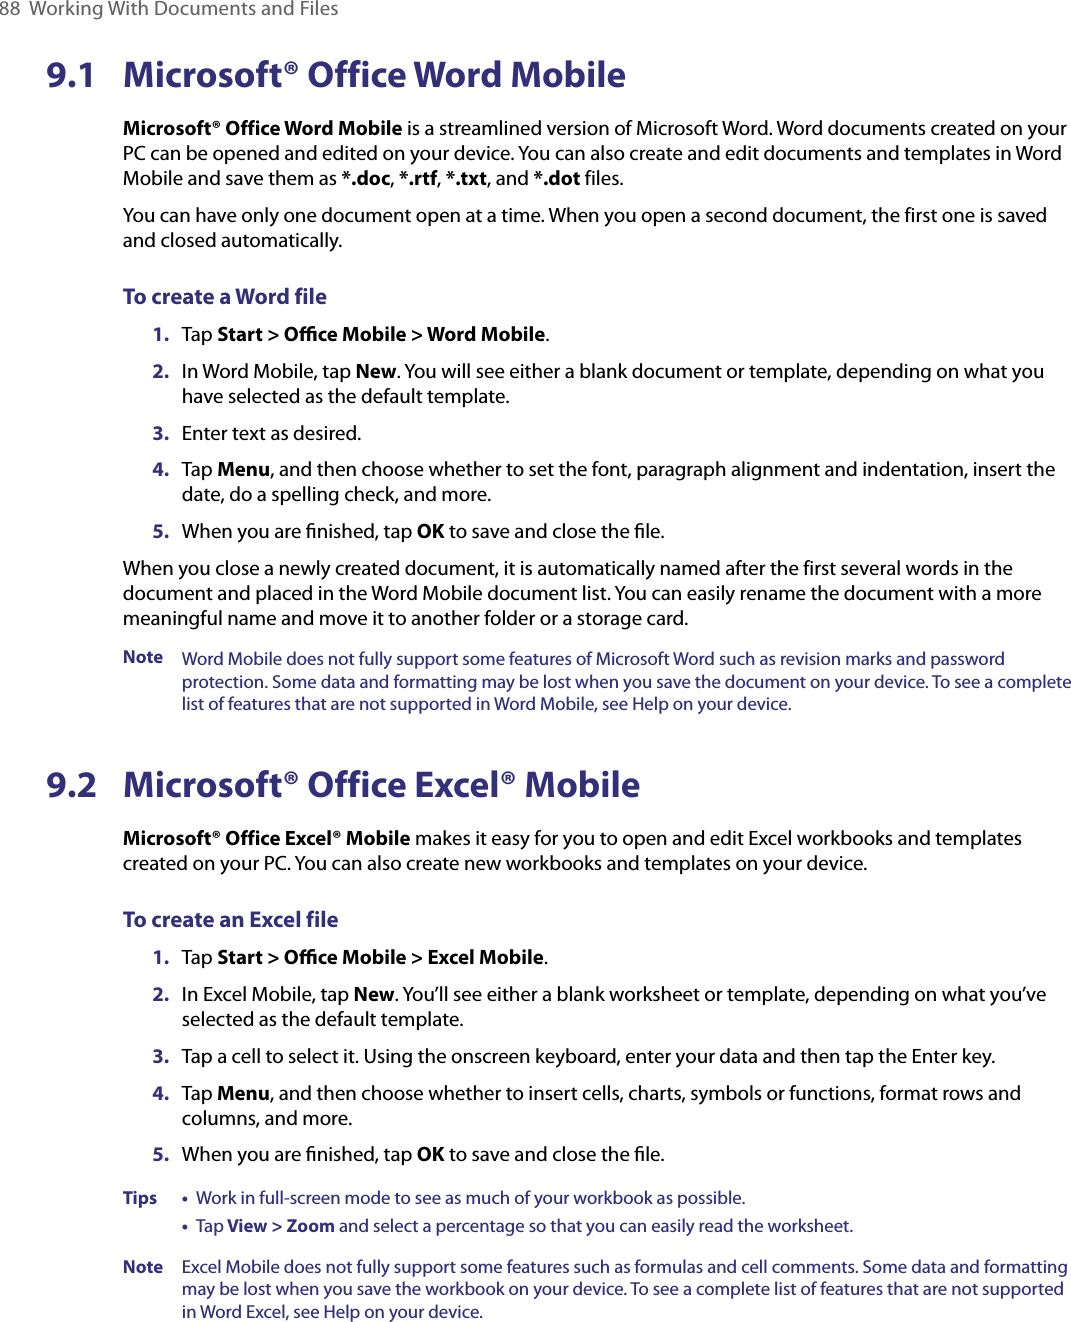 88  Working With Documents and Files9.1  Microsoft® Office Word MobileMicrosoft® Office Word Mobile is a streamlined version of Microsoft Word. Word documents created on your PC can be opened and edited on your device. You can also create and edit documents and templates in Word Mobile and save them as *.doc, *.rtf, *.txt, and *.dot files. You can have only one document open at a time. When you open a second document, the first one is saved and closed automatically.To create a Word file1. Tap Start &gt; Oﬃce Mobile &gt; Word Mobile.2.  In Word Mobile, tap New. You will see either a blank document or template, depending on what you have selected as the default template.3.  Enter text as desired.4.  Tap Menu, and then choose whether to set the font, paragraph alignment and indentation, insert the date, do a spelling check, and more.5.  When you are ﬁnished, tap OK to save and close the ﬁle.When you close a newly created document, it is automatically named after the first several words in the document and placed in the Word Mobile document list. You can easily rename the document with a more meaningful name and move it to another folder or a storage card.Note Word Mobile does not fully support some features of Microsoft Word such as revision marks and password protection. Some data and formatting may be lost when you save the document on your device. To see a complete list of features that are not supported in Word Mobile, see Help on your device.9.2  Microsoft® Office Excel® MobileMicrosoft® Office Excel® Mobile makes it easy for you to open and edit Excel workbooks and templates created on your PC. You can also create new workbooks and templates on your device.To create an Excel file1. Tap Start &gt; Oﬃce Mobile &gt; Excel Mobile.2.  In Excel Mobile, tap New. You’ll see either a blank worksheet or template, depending on what you’ve selected as the default template.3.  Tap a cell to select it. Using the onscreen keyboard, enter your data and then tap the Enter key.4.  Tap Menu, and then choose whether to insert cells, charts, symbols or functions, format rows and columns, and more.5.  When you are ﬁnished, tap OK to save and close the ﬁle.Tips • Work in full-screen mode to see as much of your workbook as possible.   • Tap View &gt; Zoom and select a percentage so that you can easily read the worksheet.Note  Excel Mobile does not fully support some features such as formulas and cell comments. Some data and formatting may be lost when you save the workbook on your device. To see a complete list of features that are not supported in Word Excel, see Help on your device.